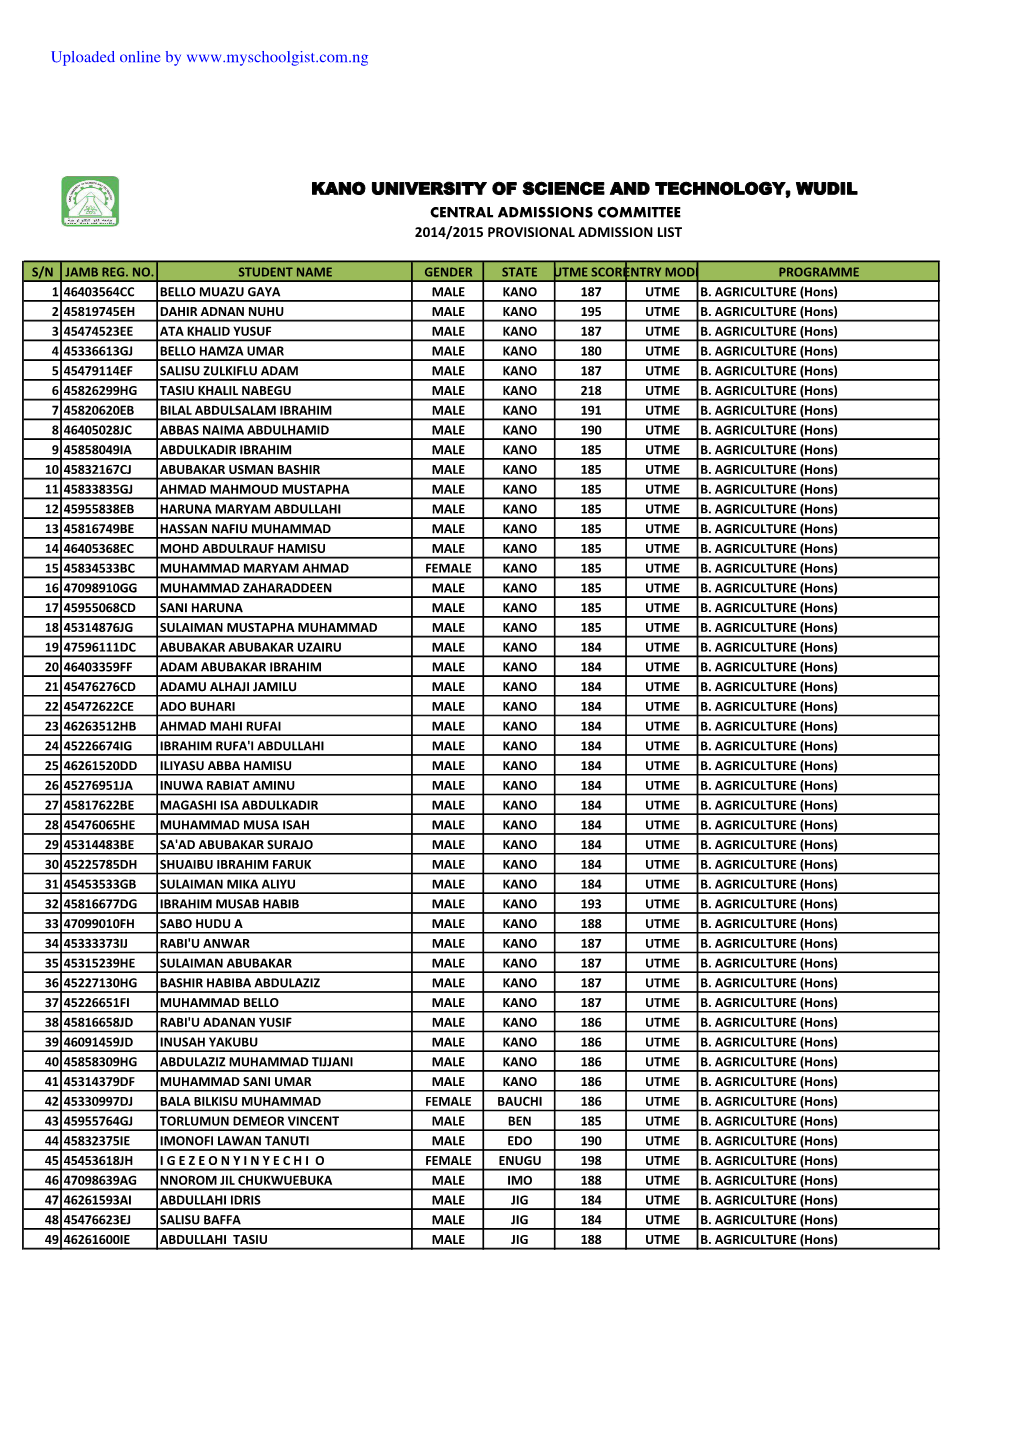 Kano University of Science and Technology, Wudil Central Admissions Committee 2014/2015 Provisional Admission List